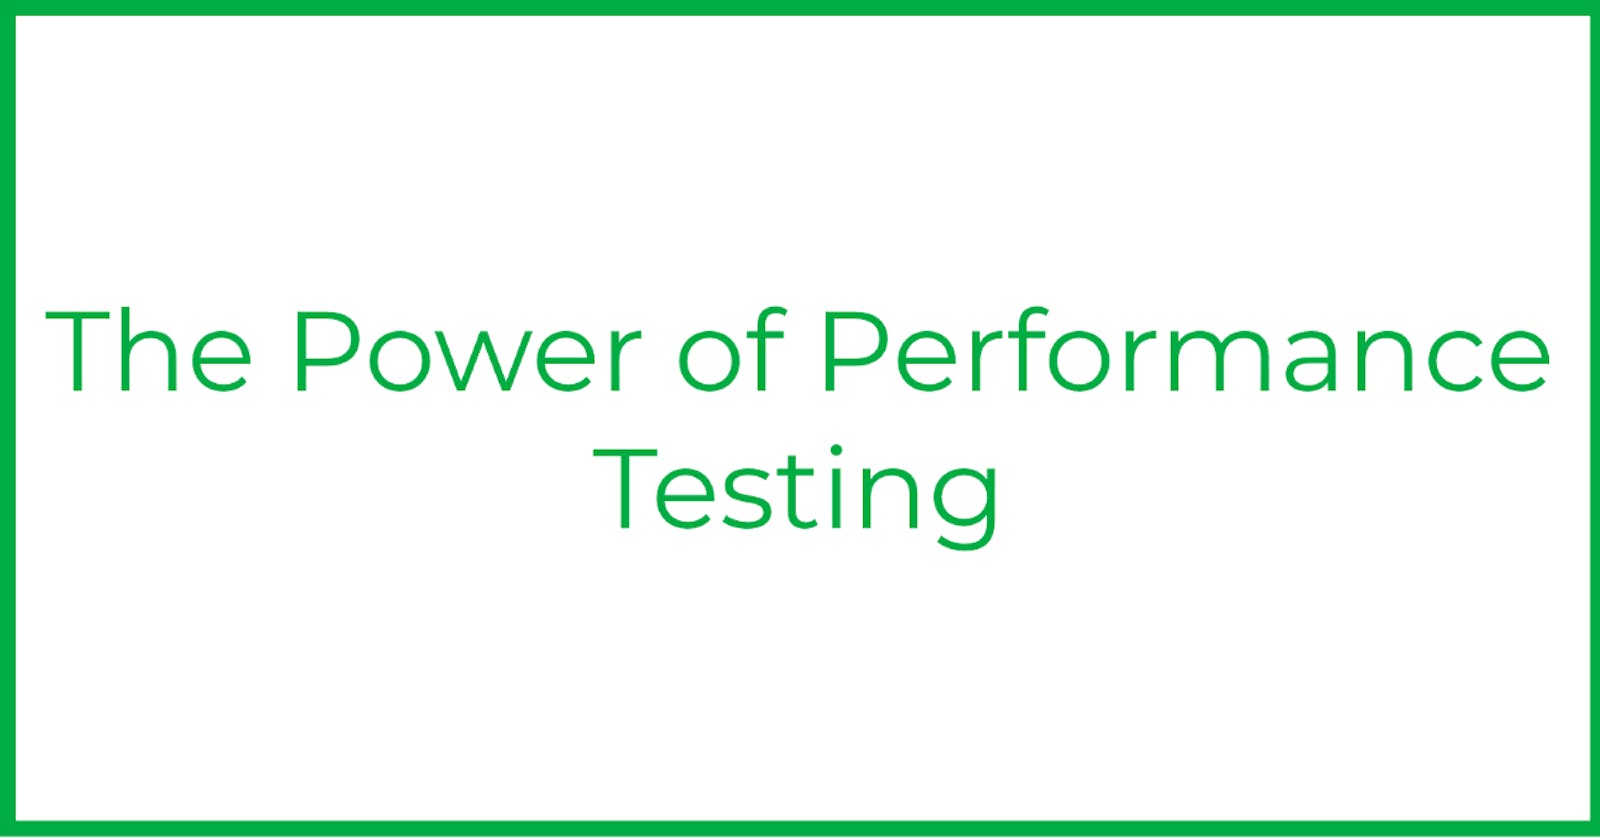 The Power of Performance Testing